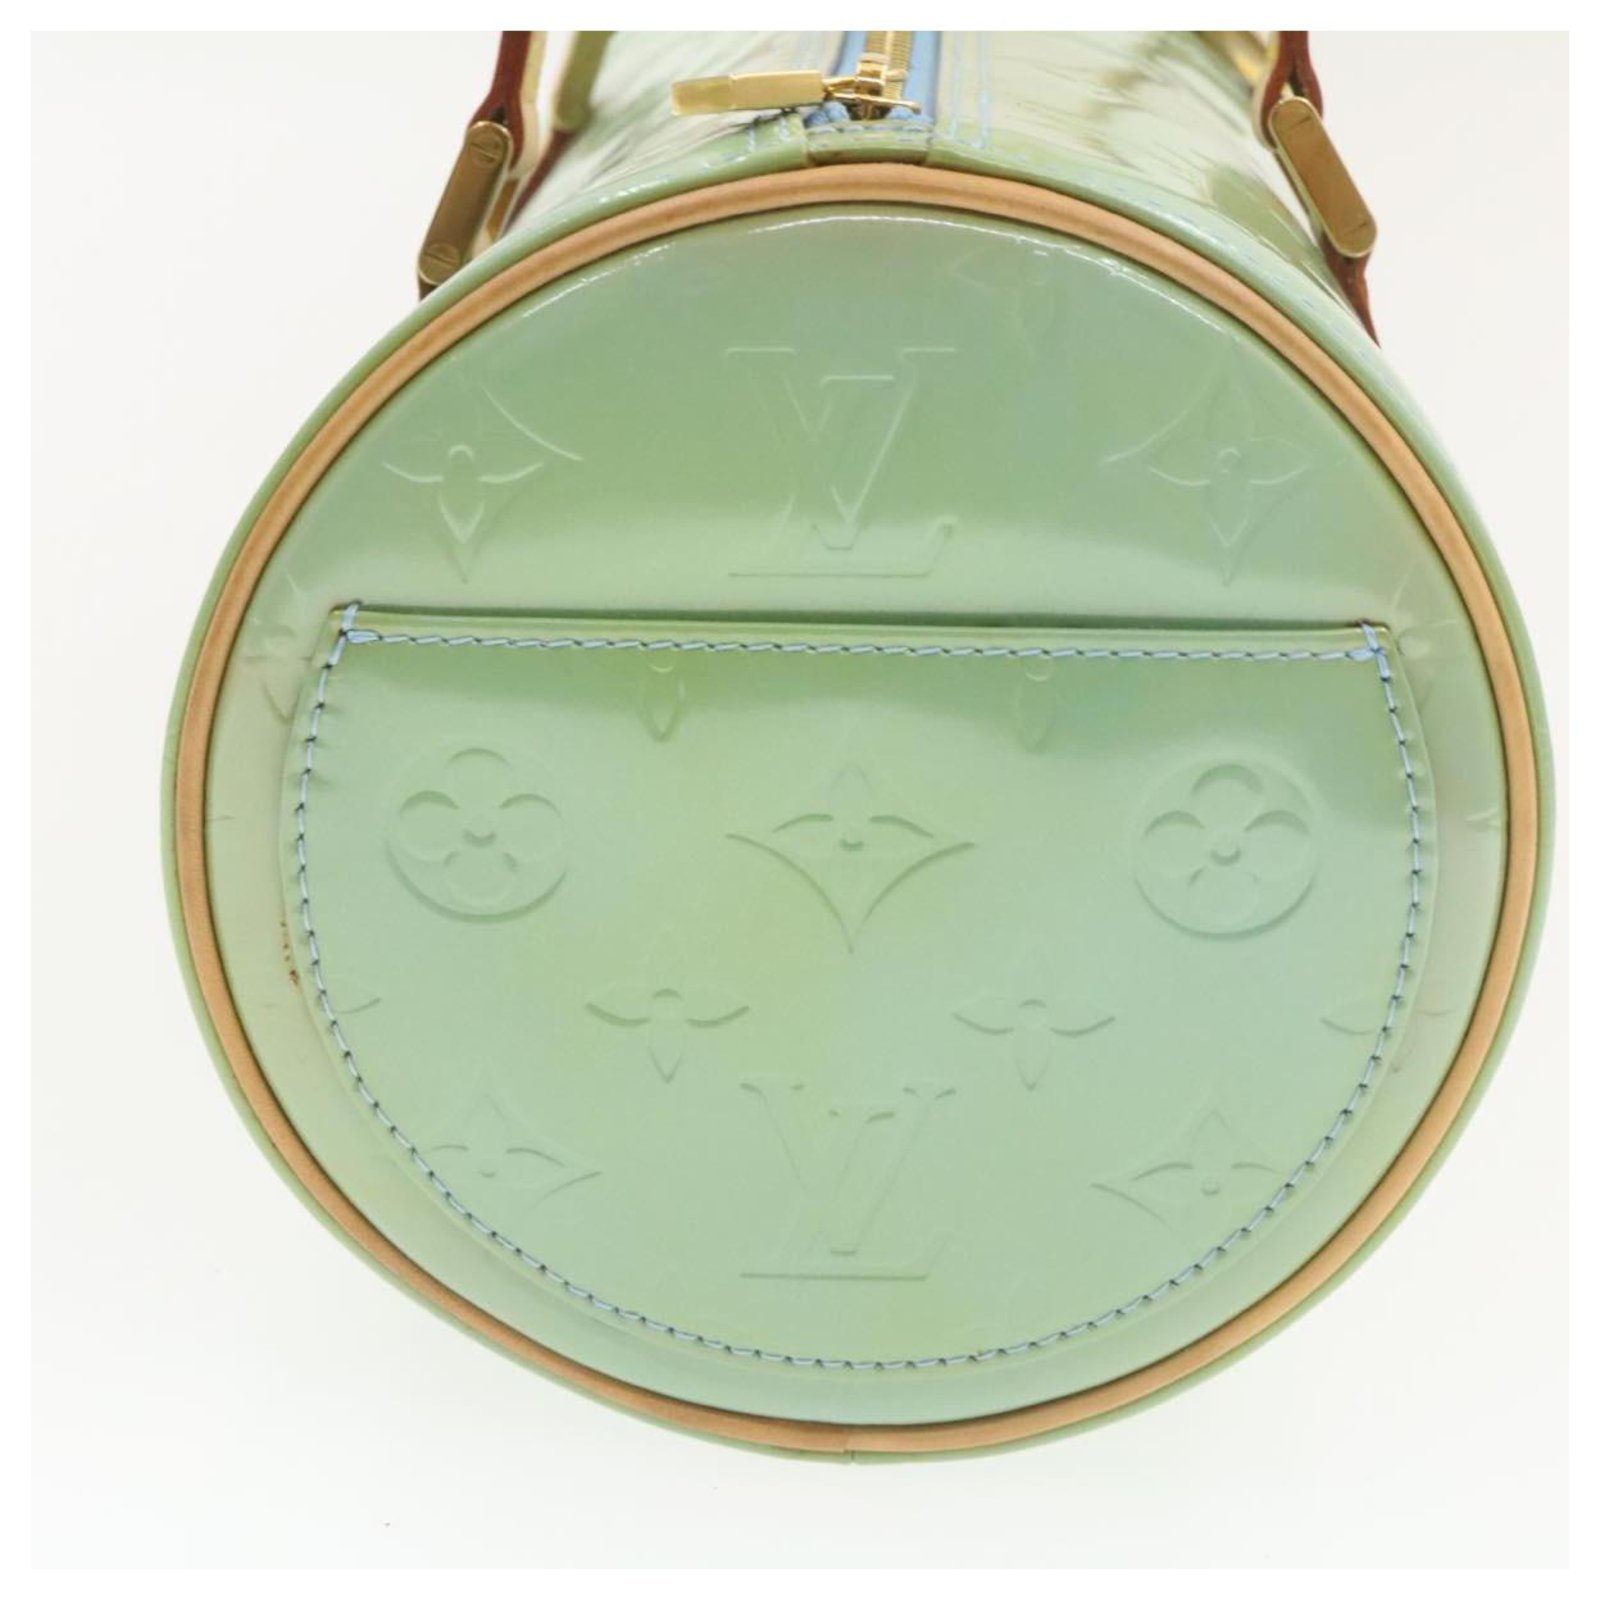 Auth LOUIS VUITTON Bedford Baby Blue (Green) Vernis Leather Hand Bag #52370